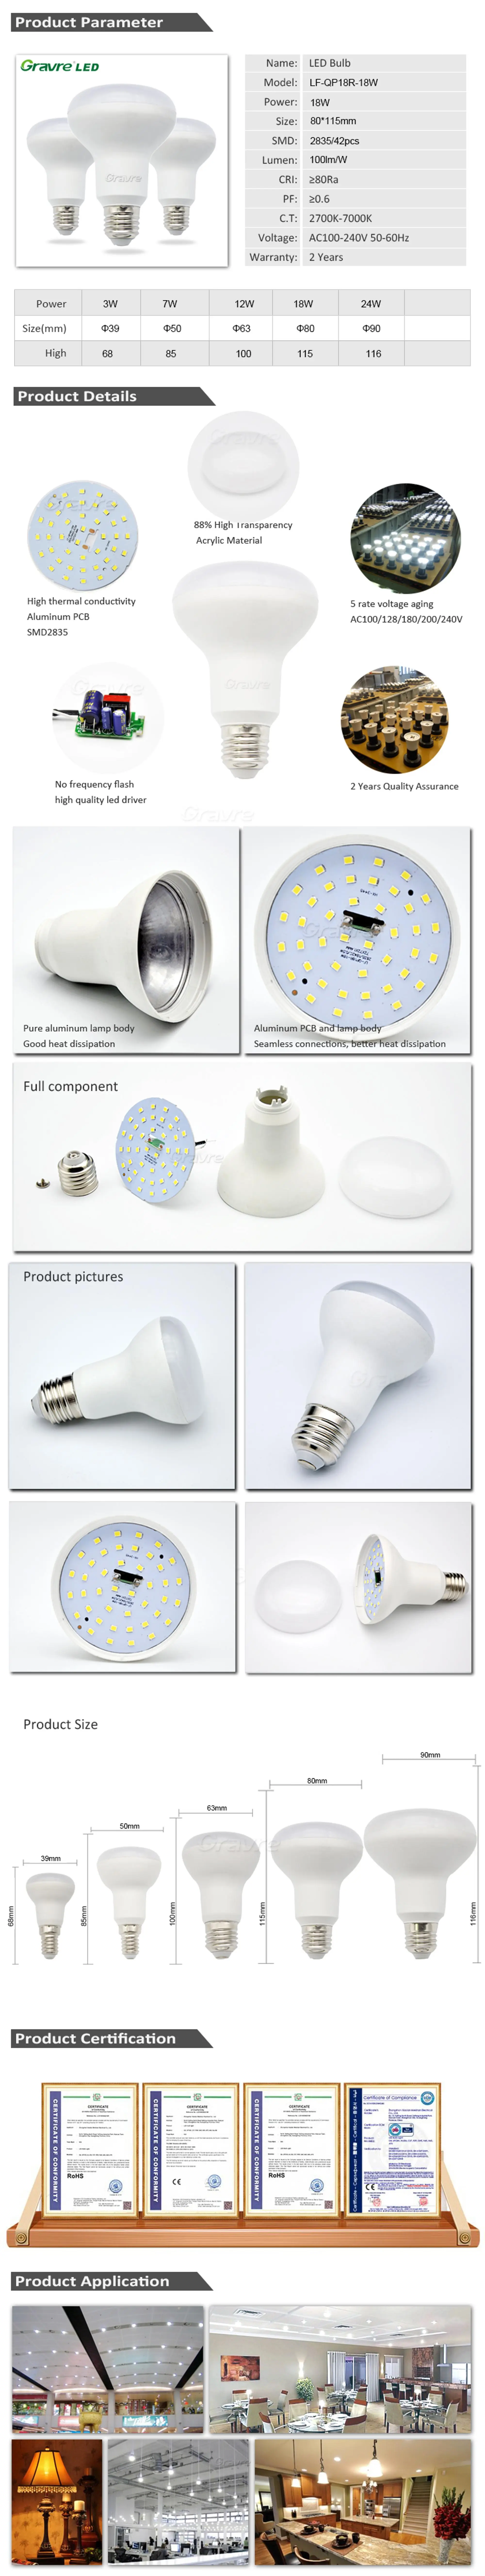 China factory r80 globe home light lamps raw material 18w e27 skd raw material led light  bulbs